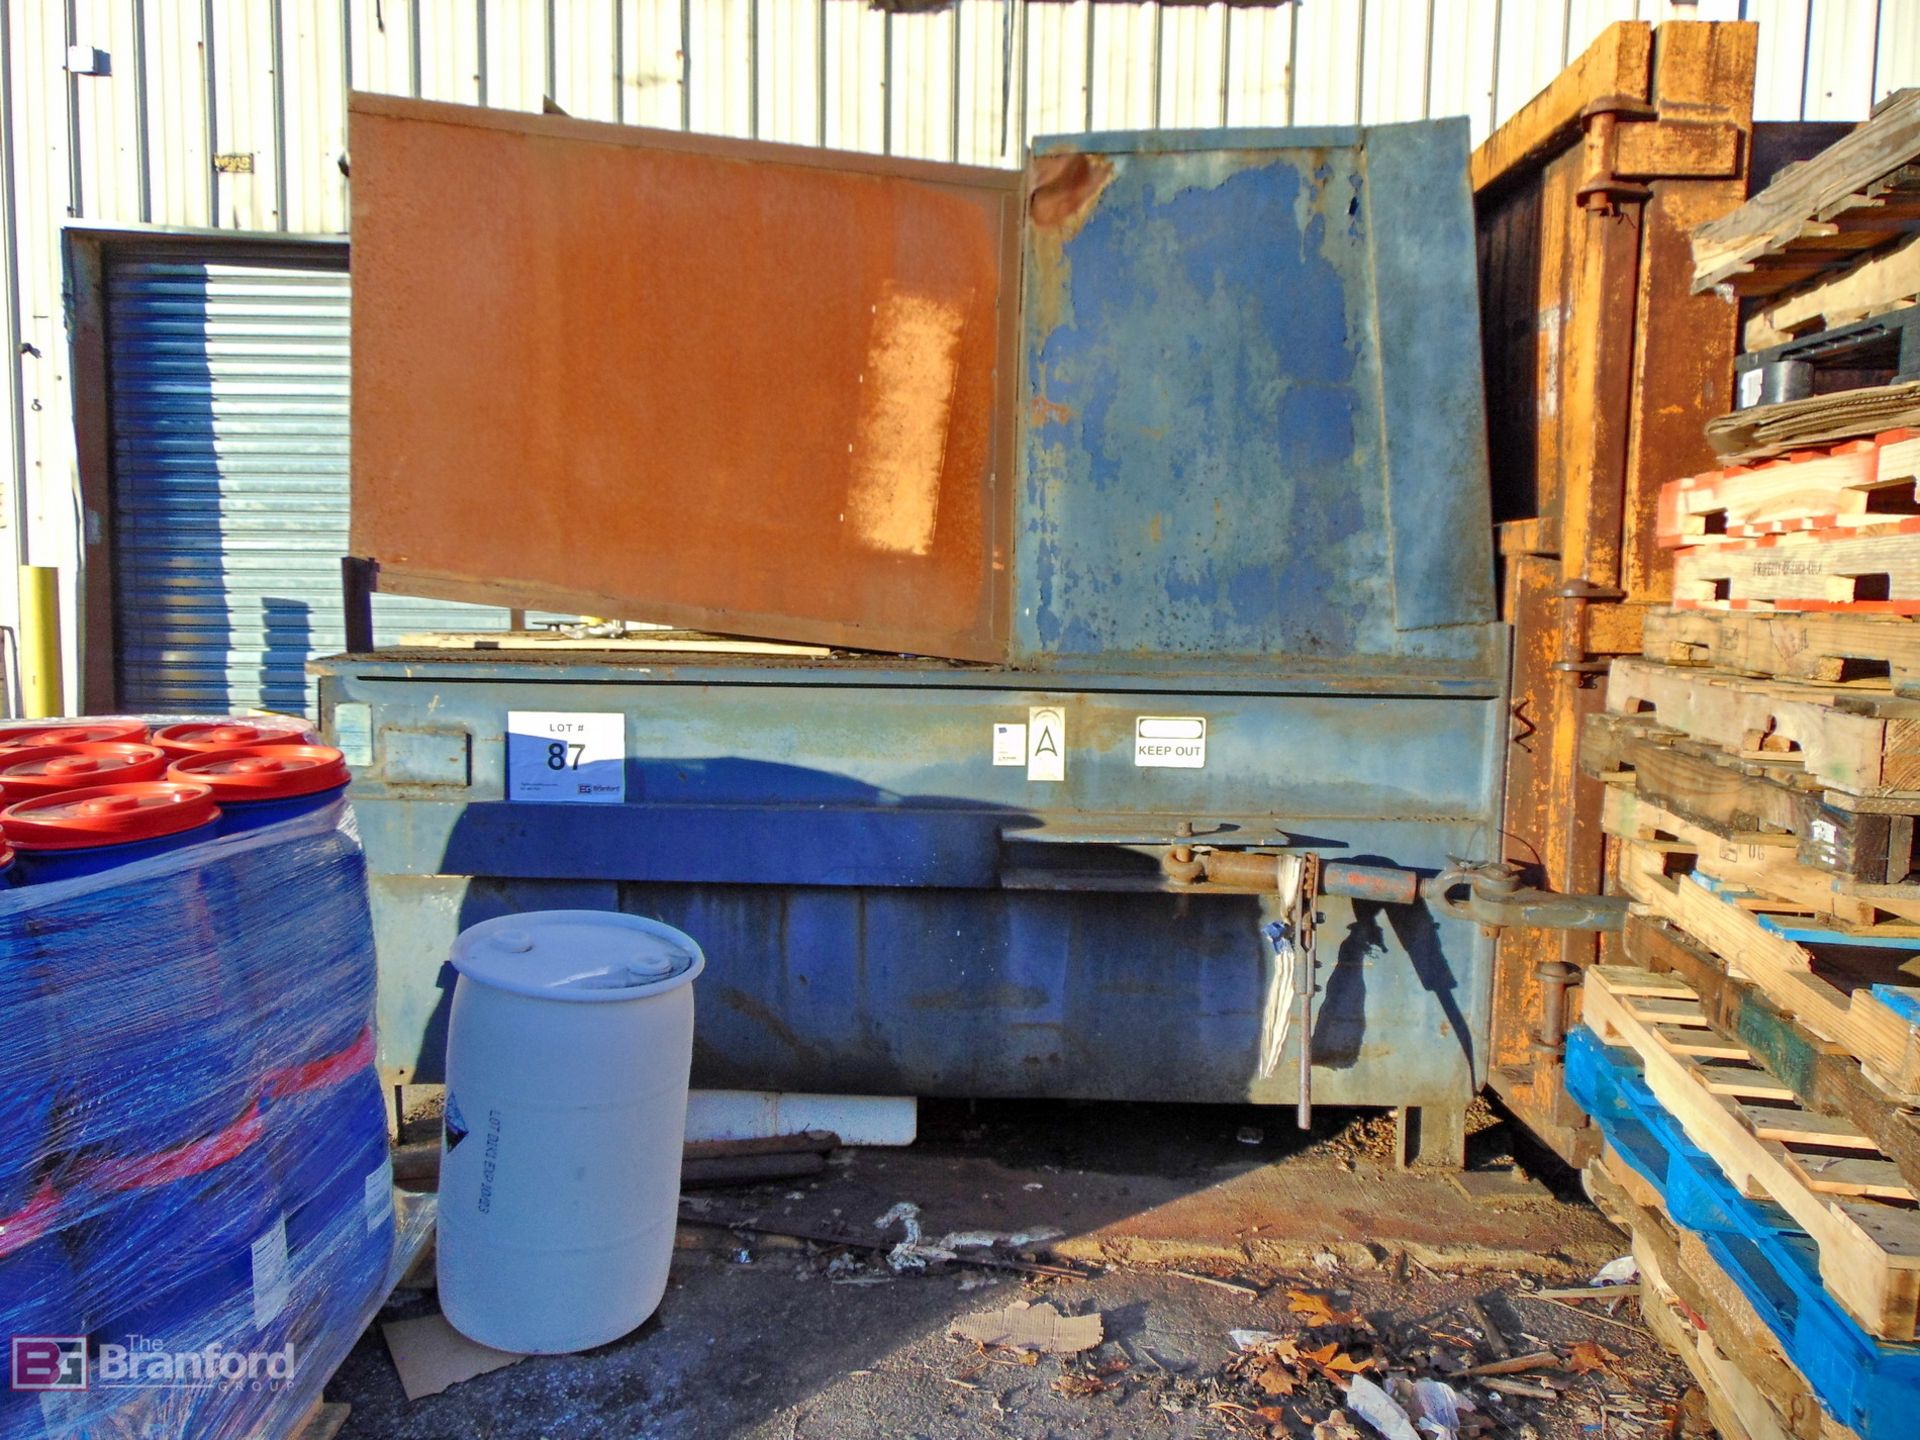 Wastequip model M2SP hydraulic trash compactor - Image 2 of 7